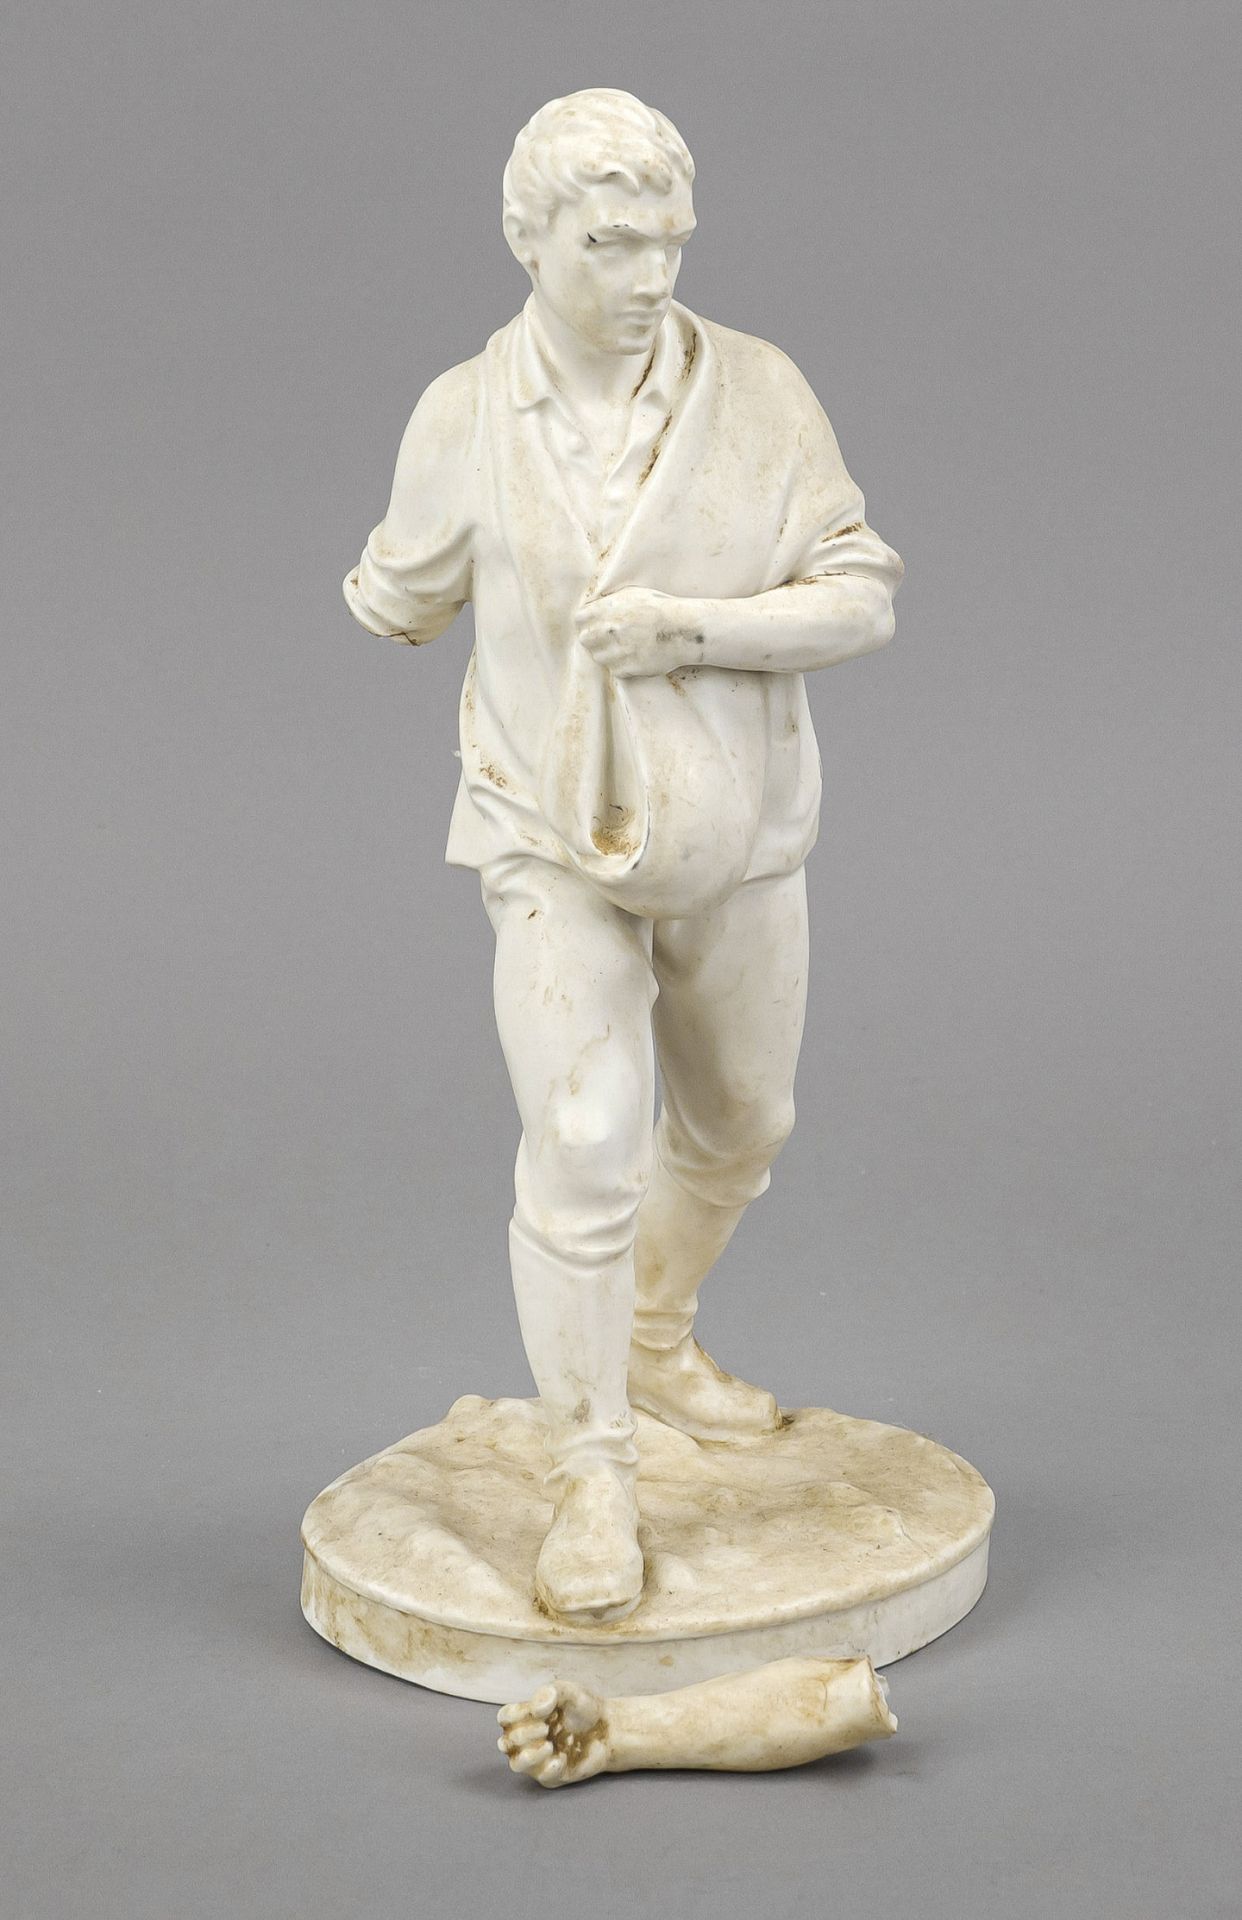 Sower, Katzhütte, green stamp mark, 1920/30s, model no. 12, white ceramic of a striding young man